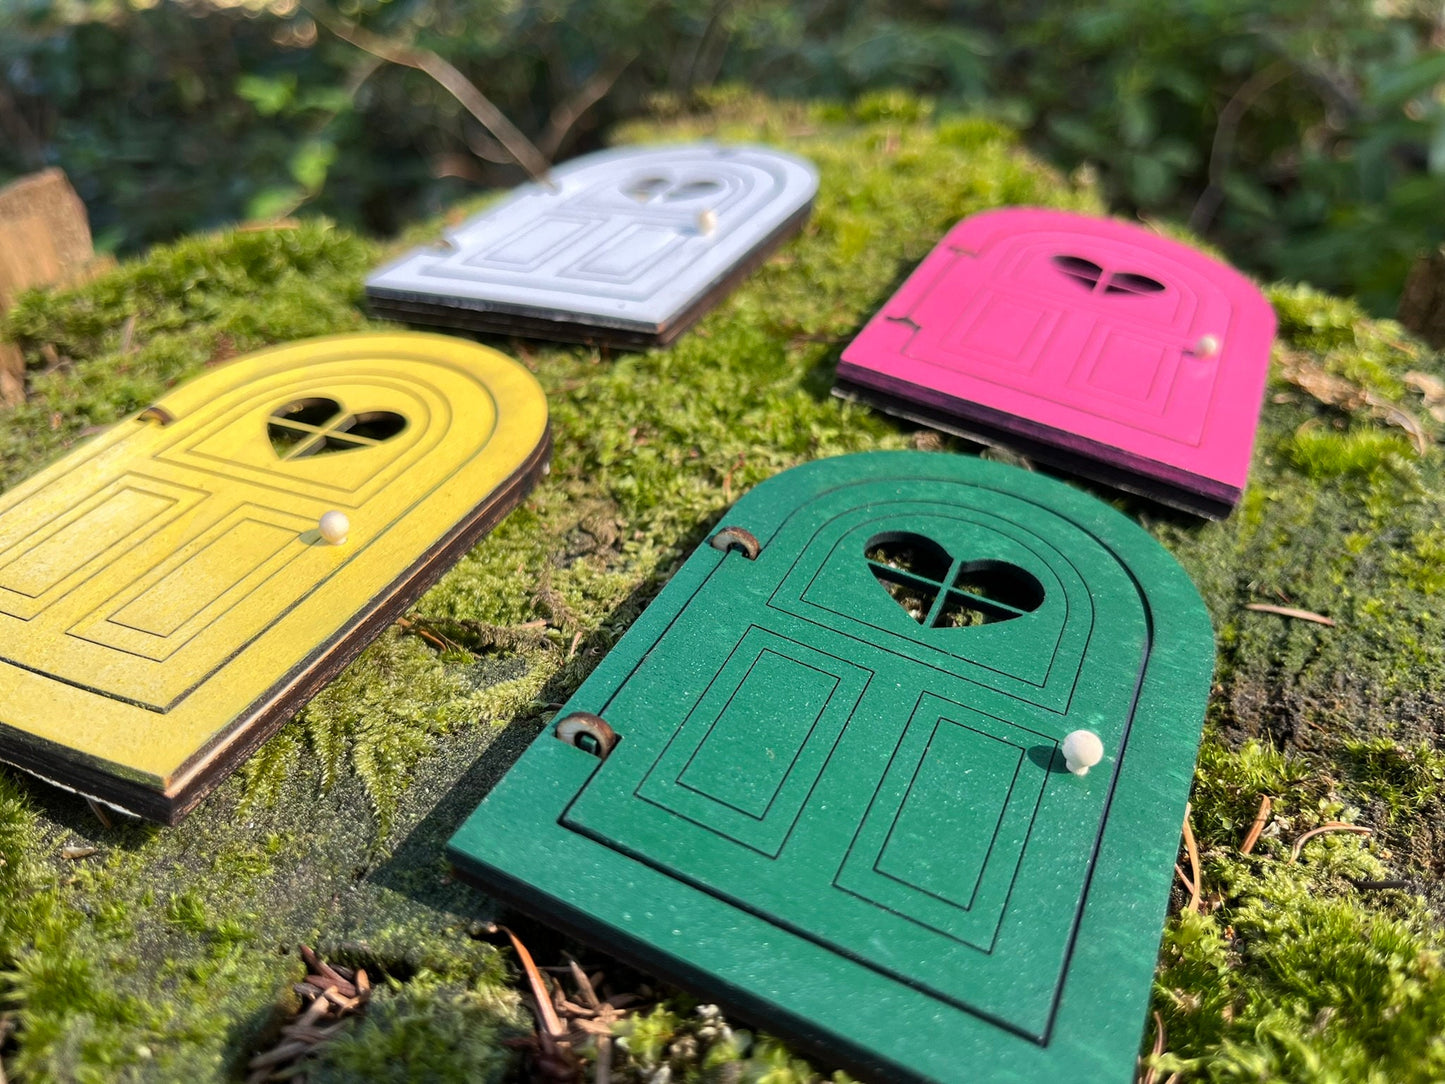 Handcrafted Openable Colored Fairy Doors for Enchanting Outdoor Fairy Gardens